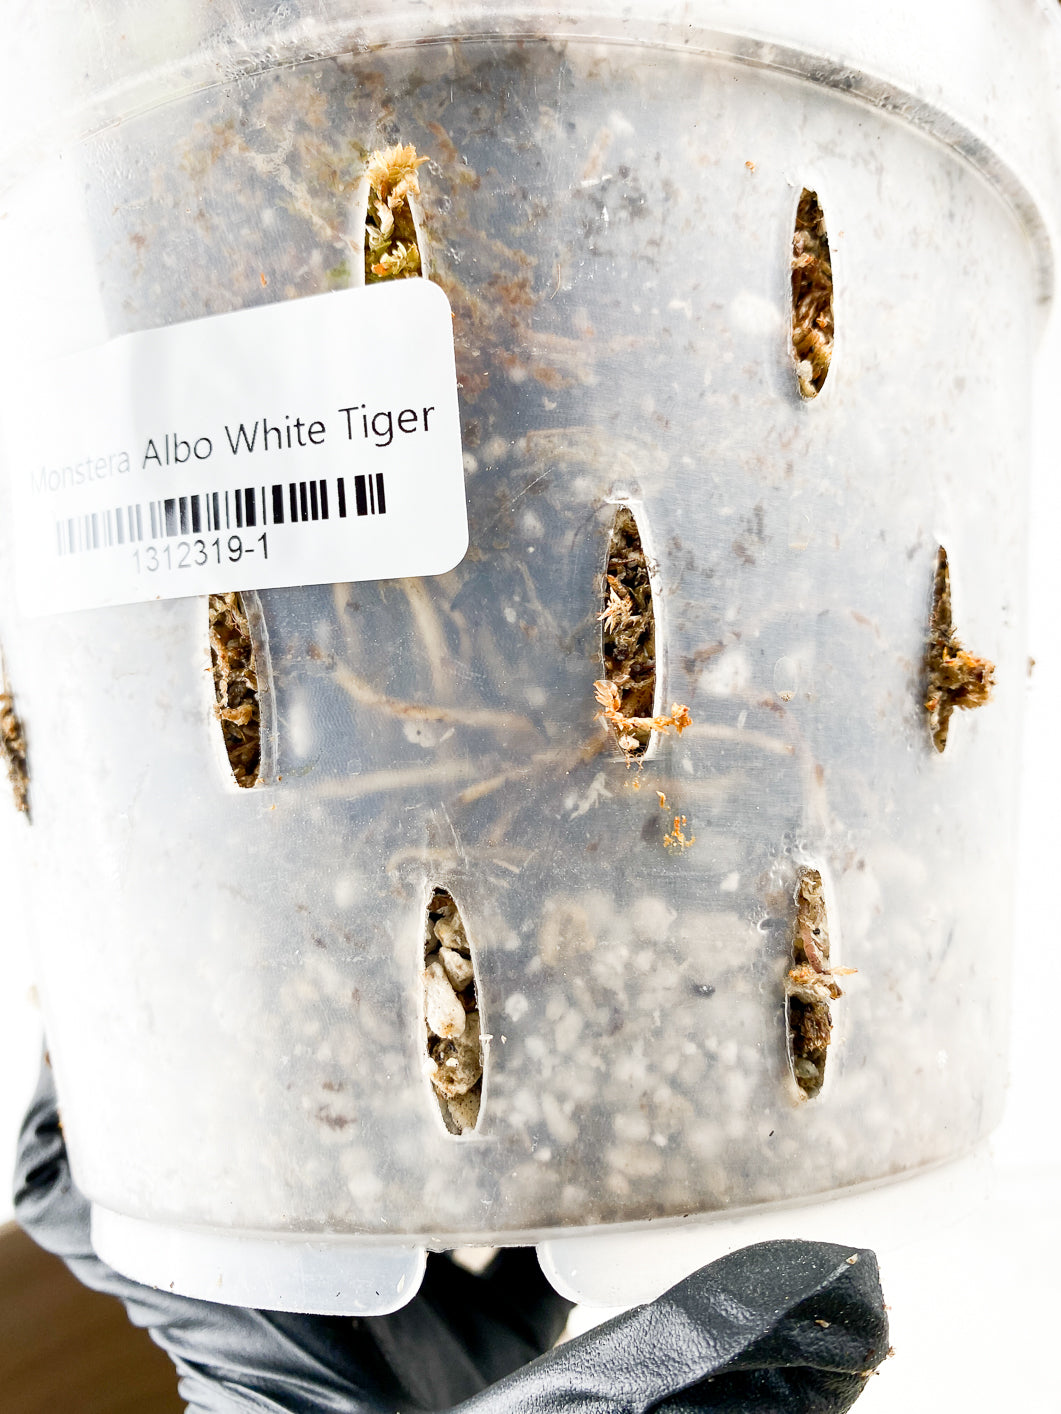 Monstera Albo White Tiger 1 leaf rooted